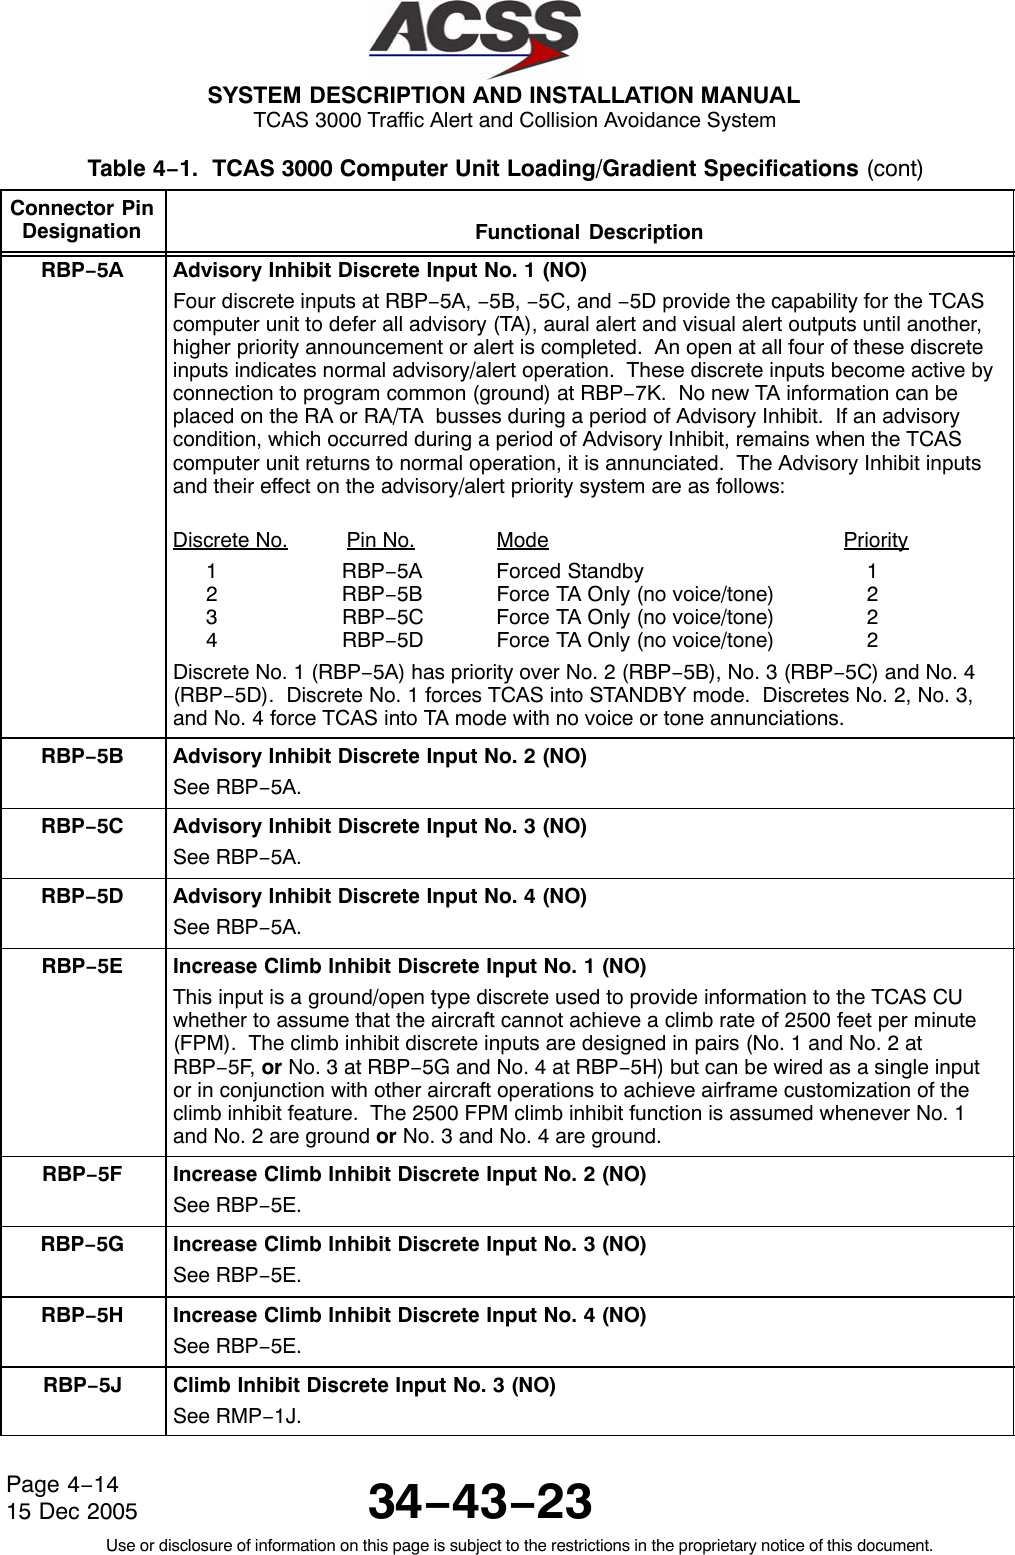  SYSTEM DESCRIPTION AND INSTALLATION MANUAL TCAS 3000 Traffic Alert and Collision Avoidance System34−43−23Use or disclosure of information on this page is subject to the restrictions in the proprietary notice of this document.Page 4−1415 Dec 2005Table 4−1.  TCAS 3000 Computer Unit Loading/Gradient Specifications (cont)Connector PinDesignation Functional DescriptionRBP−5A Advisory Inhibit Discrete Input No. 1 (NO)Four discrete inputs at RBP−5A, −5B, −5C, and −5D provide the capability for the TCAScomputer unit to defer all advisory (TA), aural alert and visual alert outputs until another,higher priority announcement or alert is completed.  An open at all four of these discreteinputs indicates normal advisory/alert operation.  These discrete inputs become active byconnection to program common (ground) at RBP−7K.  No new TA information can beplaced on the RA or RA/TA  busses during a period of Advisory Inhibit.  If an advisorycondition, which occurred during a period of Advisory Inhibit, remains when the TCAScomputer unit returns to normal operation, it is annunciated.  The Advisory Inhibit inputsand their effect on the advisory/alert priority system are as follows:Discrete No. Pin No. Mode Priority1 RBP−5A Forced Standby 12 RBP−5B Force TA Only (no voice/tone) 23 RBP−5C Force TA Only (no voice/tone) 24 RBP−5D Force TA Only (no voice/tone) 2Discrete No. 1 (RBP−5A) has priority over No. 2 (RBP−5B), No. 3 (RBP−5C) and No. 4(RBP−5D).  Discrete No. 1 forces TCAS into STANDBY mode.  Discretes No. 2, No. 3,and No. 4 force TCAS into TA mode with no voice or tone annunciations.RBP−5B Advisory Inhibit Discrete Input No. 2 (NO)See RBP−5A.RBP−5C Advisory Inhibit Discrete Input No. 3 (NO)See RBP−5A.RBP−5D Advisory Inhibit Discrete Input No. 4 (NO)See RBP−5A.RBP−5E Increase Climb Inhibit Discrete Input No. 1 (NO)This input is a ground/open type discrete used to provide information to the TCAS CUwhether to assume that the aircraft cannot achieve a climb rate of 2500 feet per minute(FPM).  The climb inhibit discrete inputs are designed in pairs (No. 1 and No. 2 atRBP−5F, or No. 3 at RBP−5G and No. 4 at RBP−5H) but can be wired as a single inputor in conjunction with other aircraft operations to achieve airframe customization of theclimb inhibit feature.  The 2500 FPM climb inhibit function is assumed whenever No. 1and No. 2 are ground or No. 3 and No. 4 are ground.RBP−5F Increase Climb Inhibit Discrete Input No. 2 (NO)See RBP−5E.RBP−5G Increase Climb Inhibit Discrete Input No. 3 (NO)See RBP−5E.RBP−5H Increase Climb Inhibit Discrete Input No. 4 (NO)See RBP−5E.RBP−5J Climb Inhibit Discrete Input No. 3 (NO)See RMP−1J.